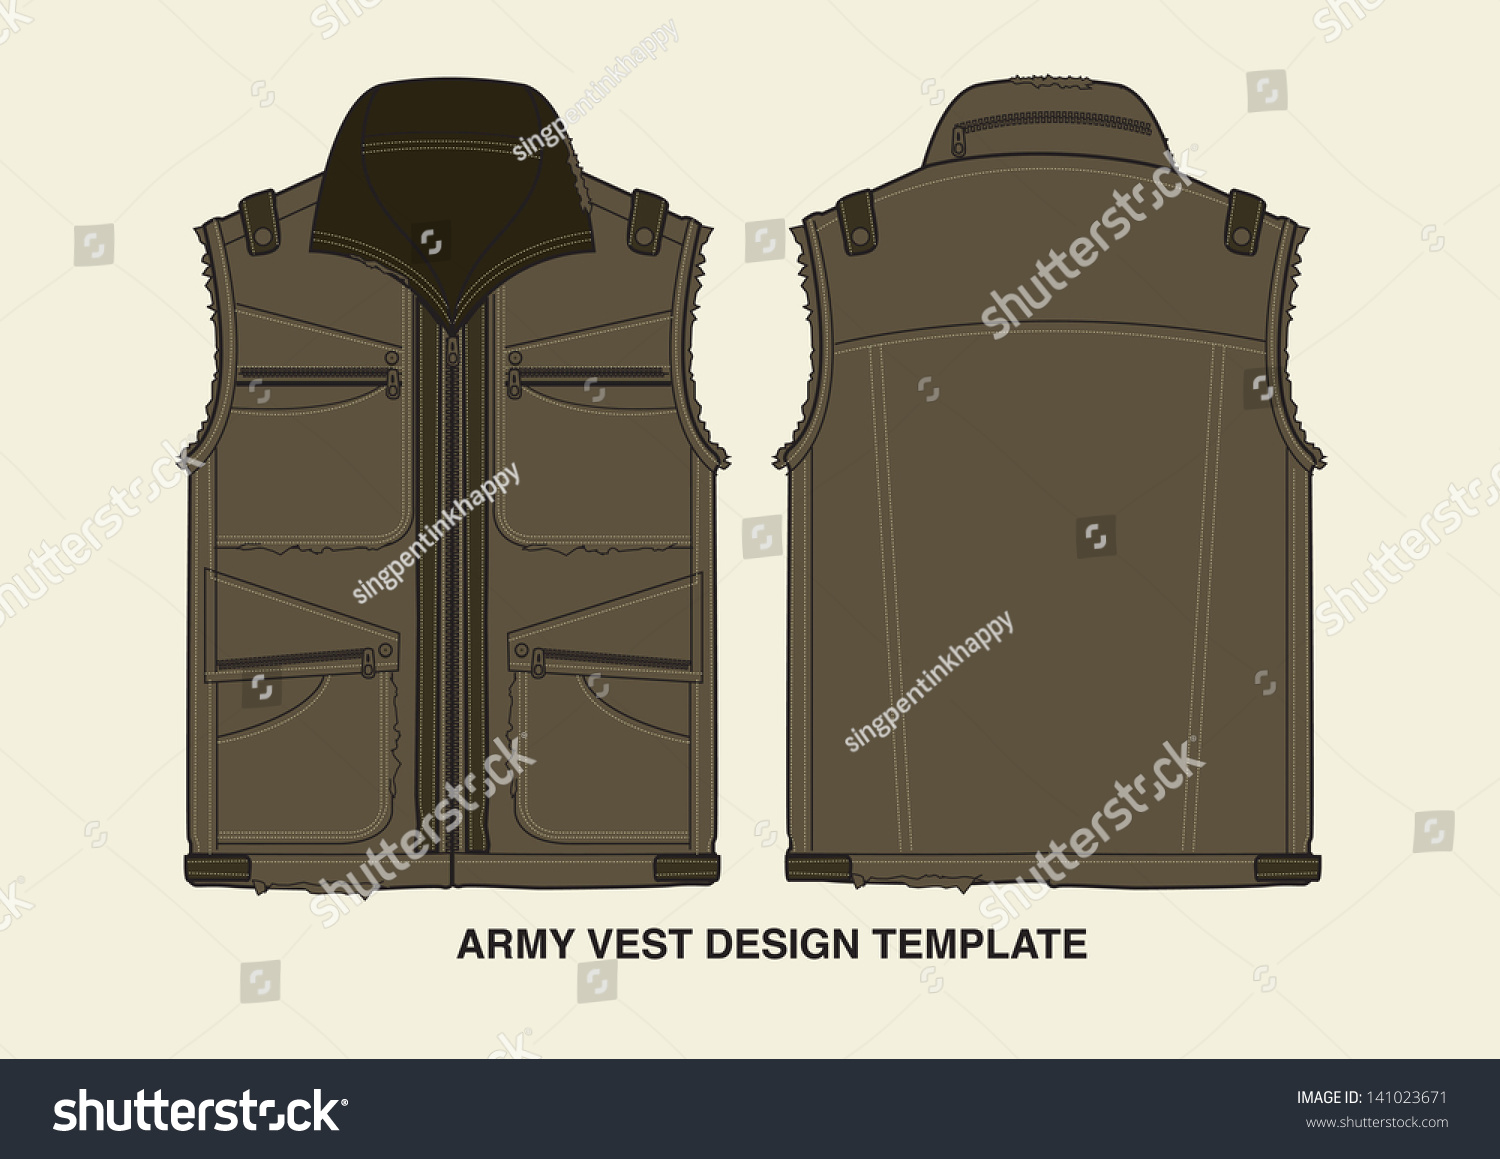 Download Template Vector Army Vest Stock Vector Royalty Free 141023671